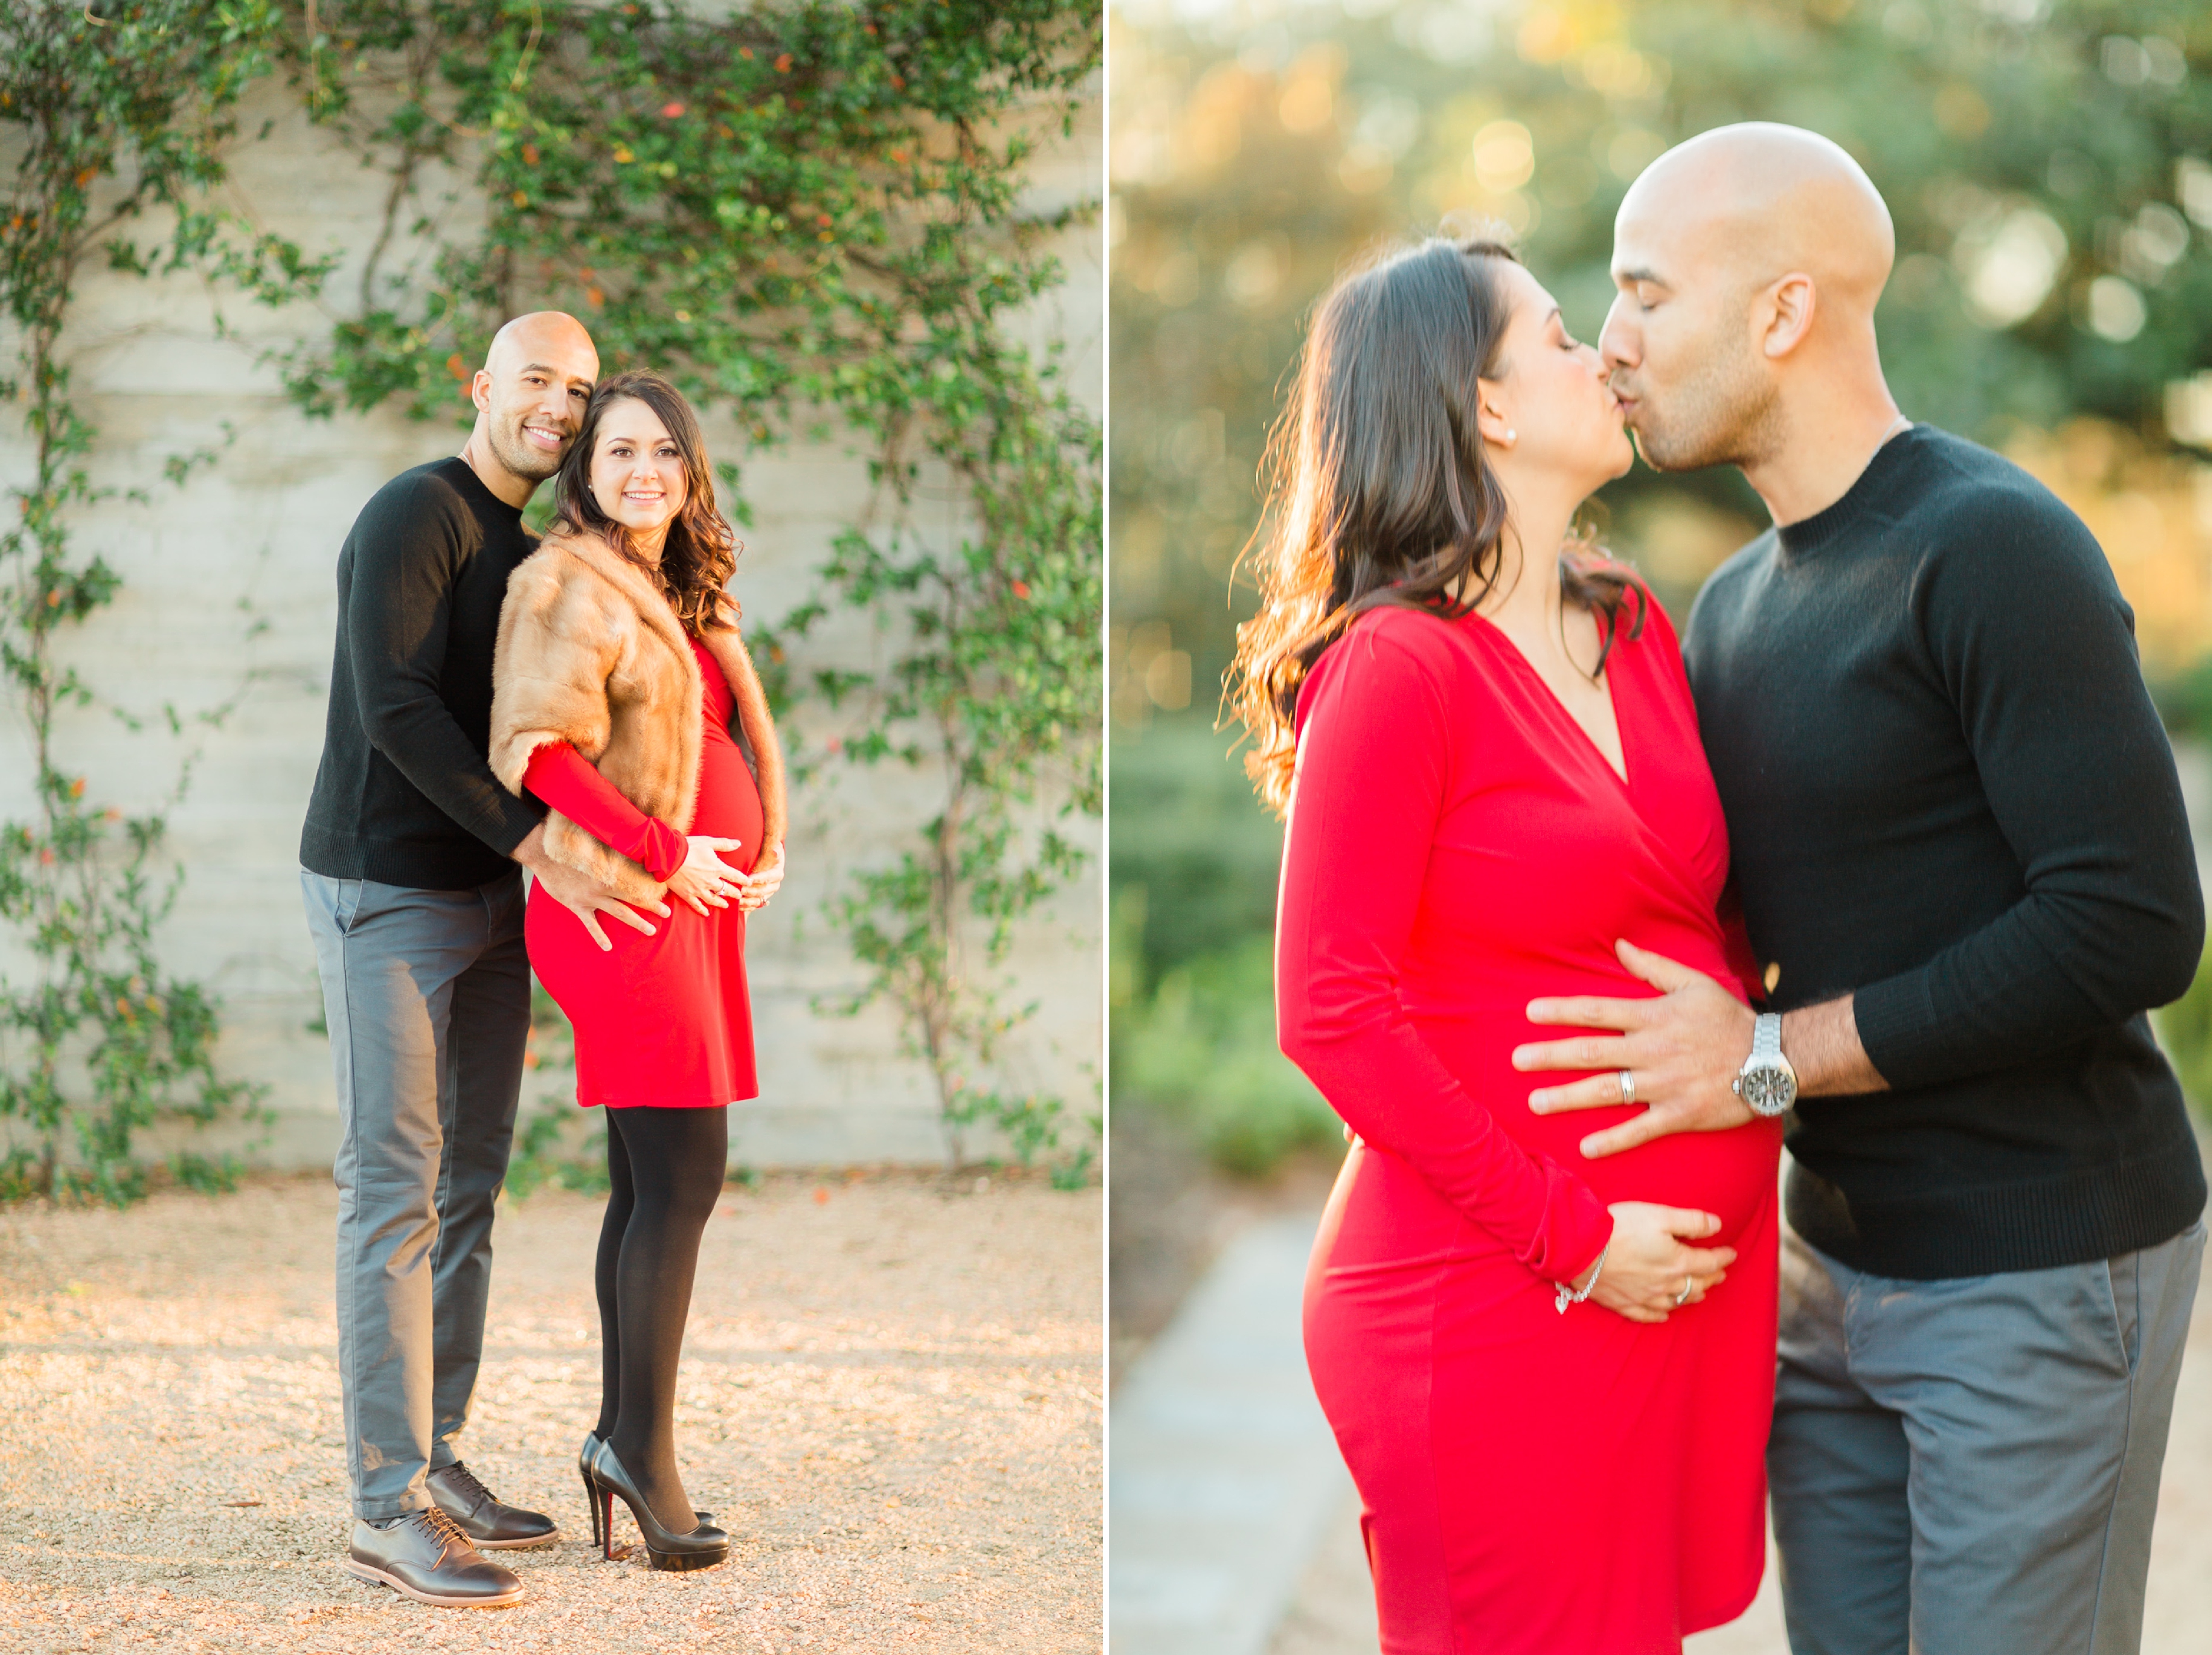 Perfect Time to Take Maternity Photos